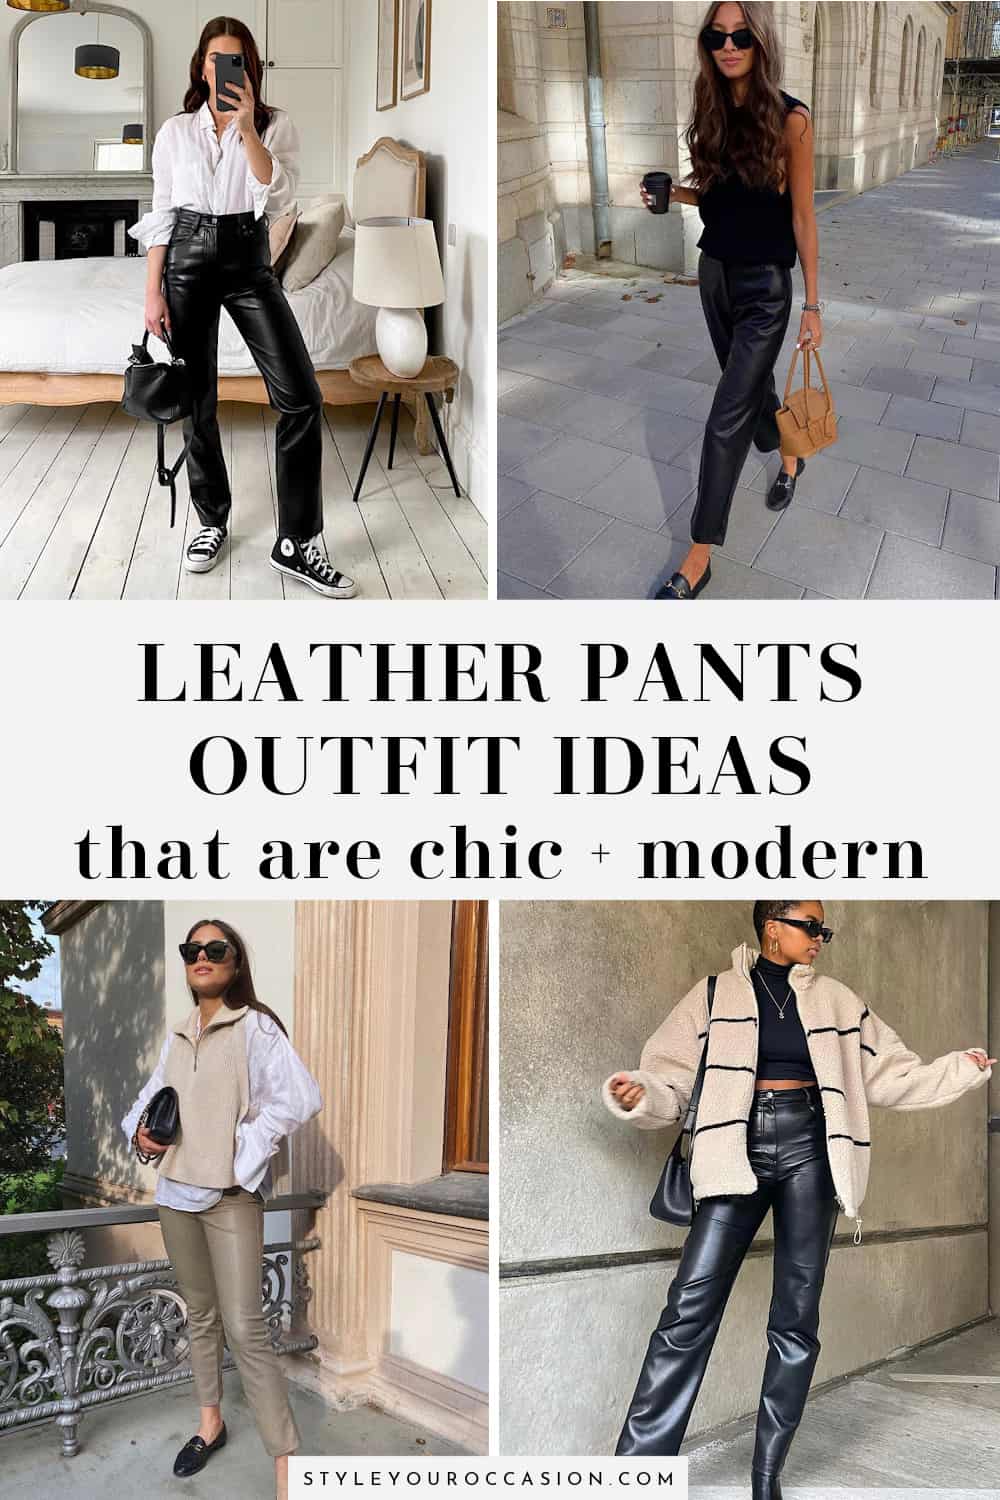 17+ Chic Leather Pants Outfit Ideas That Prove You Need A Pair!